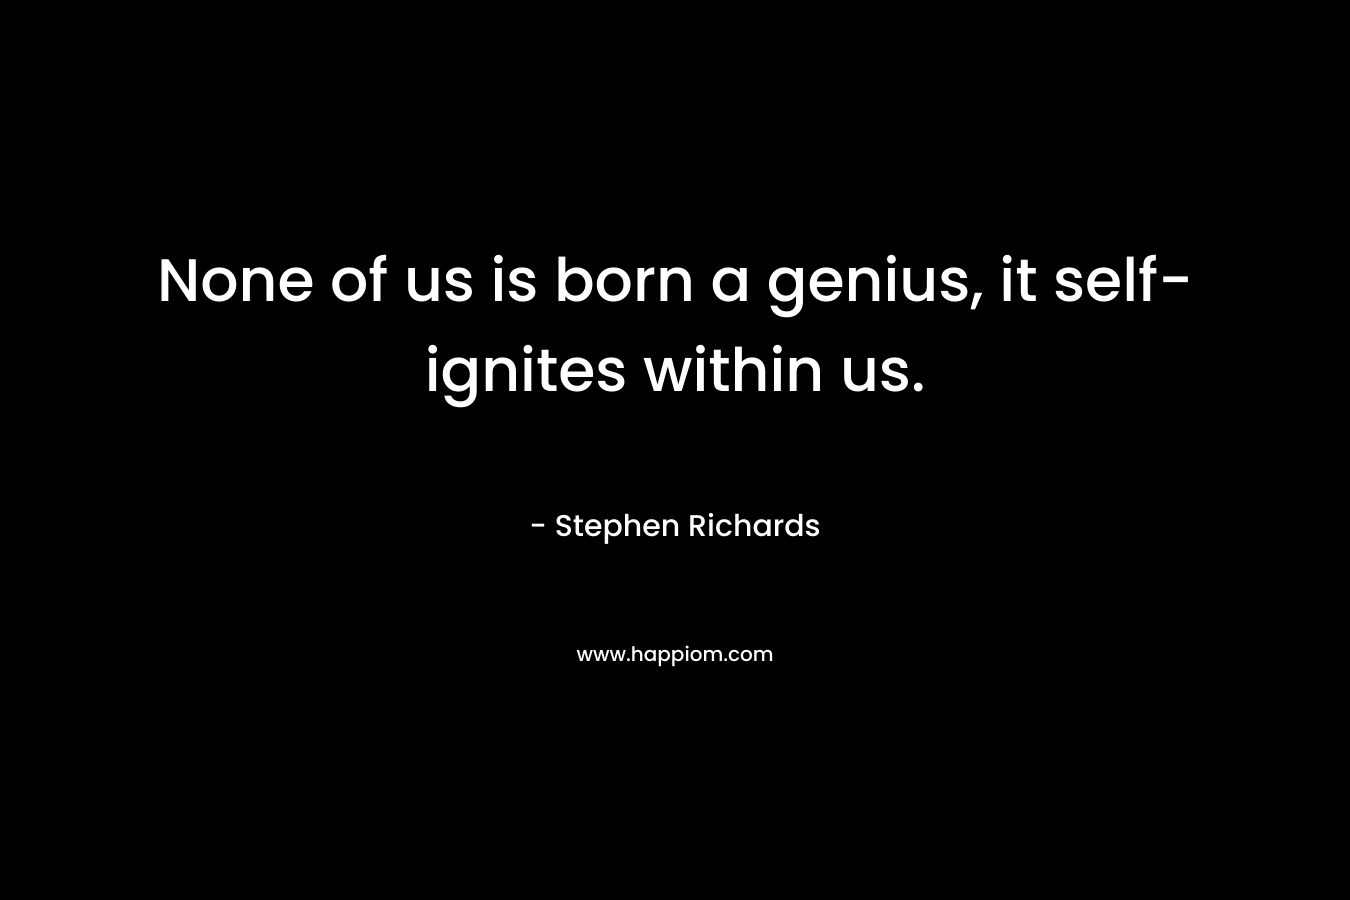 None of us is born a genius, it self-ignites within us. – Stephen Richards